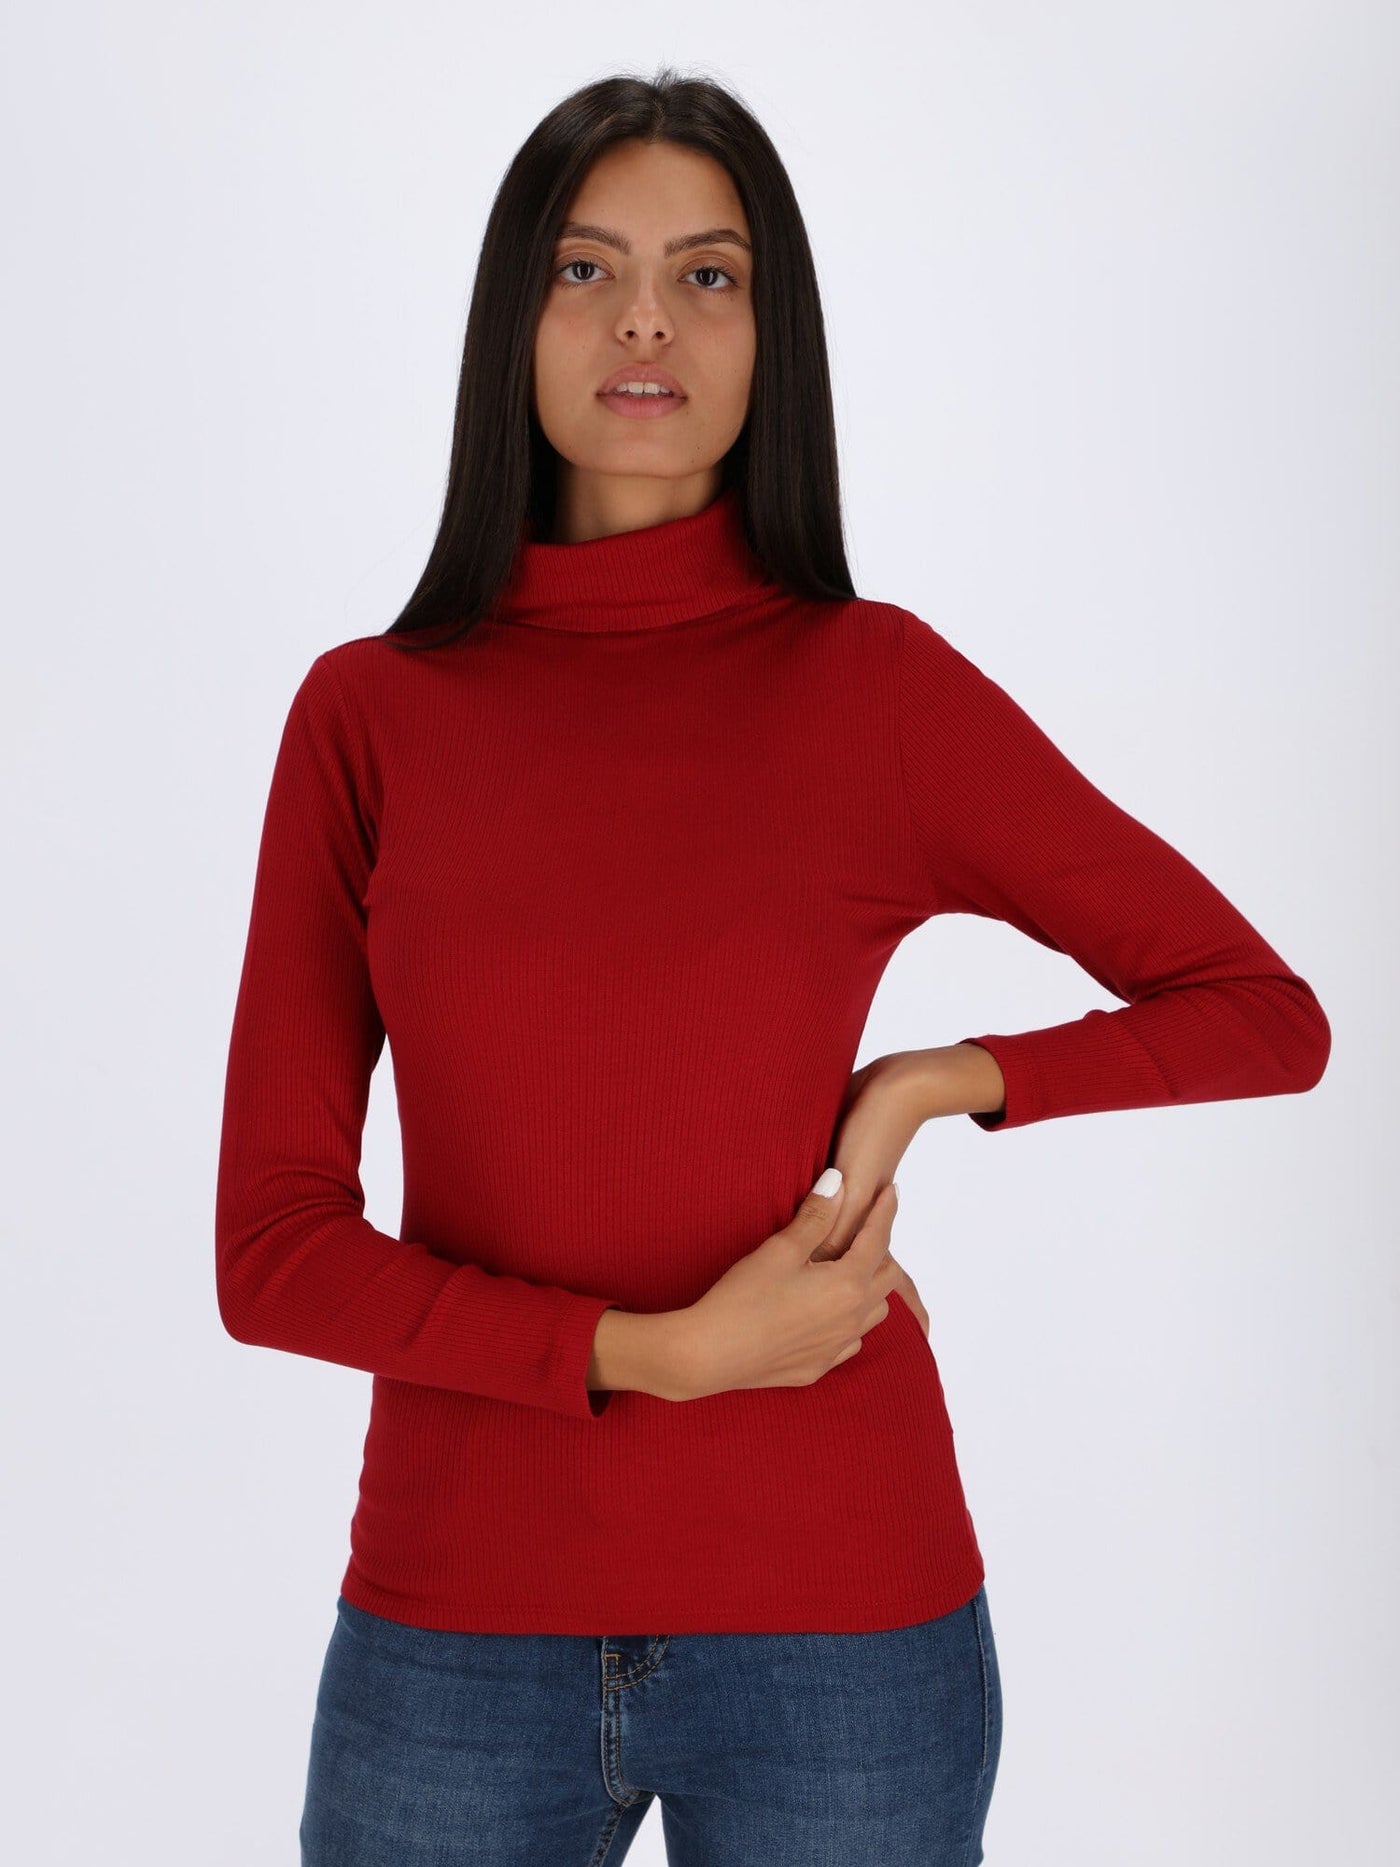 OR Tops & Blouses Rio Red / S Ribbed Turtle Neck Top with Long Sleeves